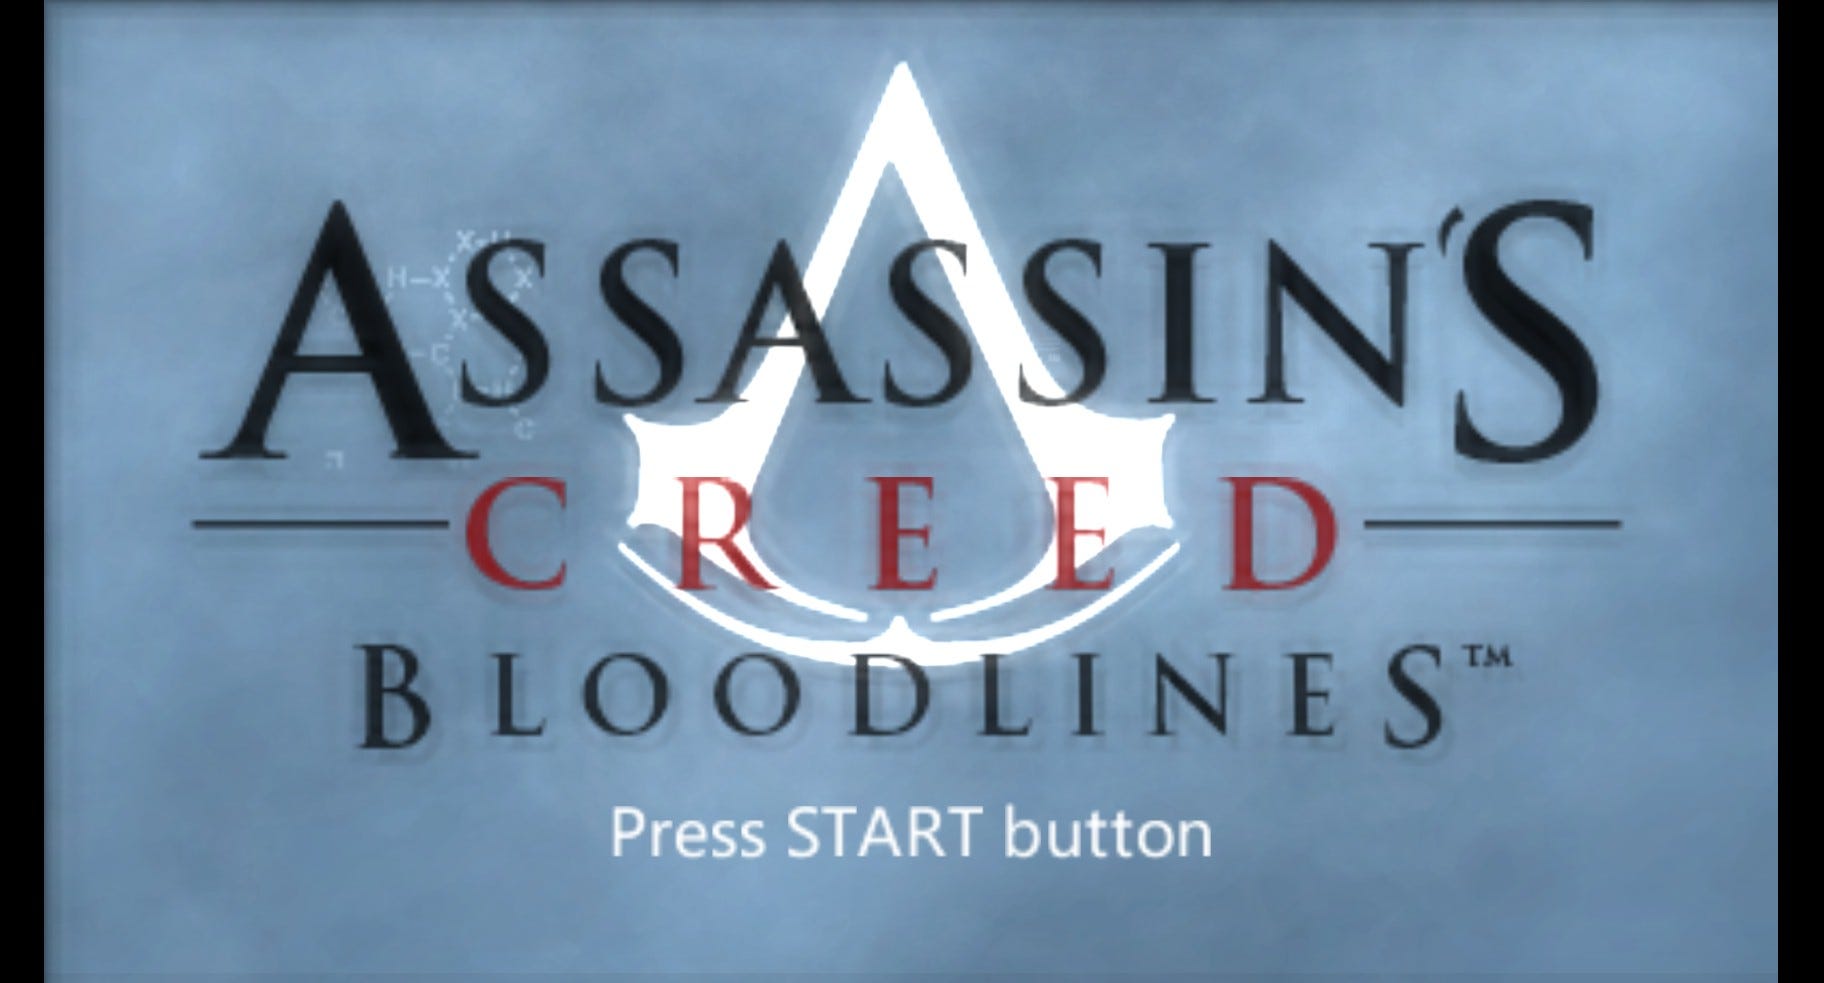 Assassin's Screed Bloodlines. Welcome back, Assassins, this time